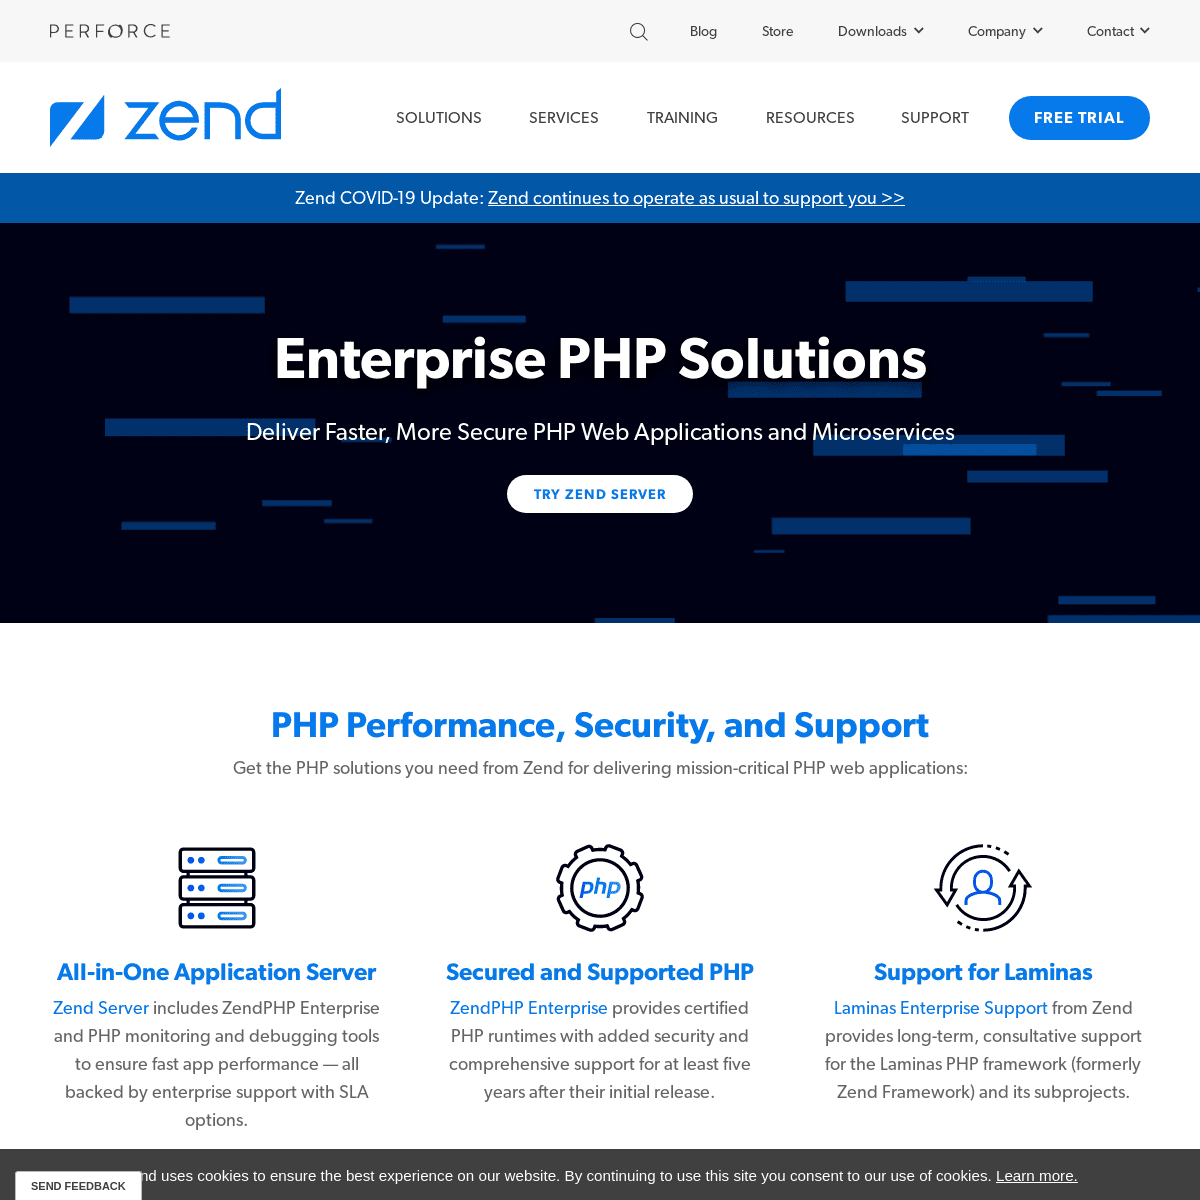 A complete backup of zend.com